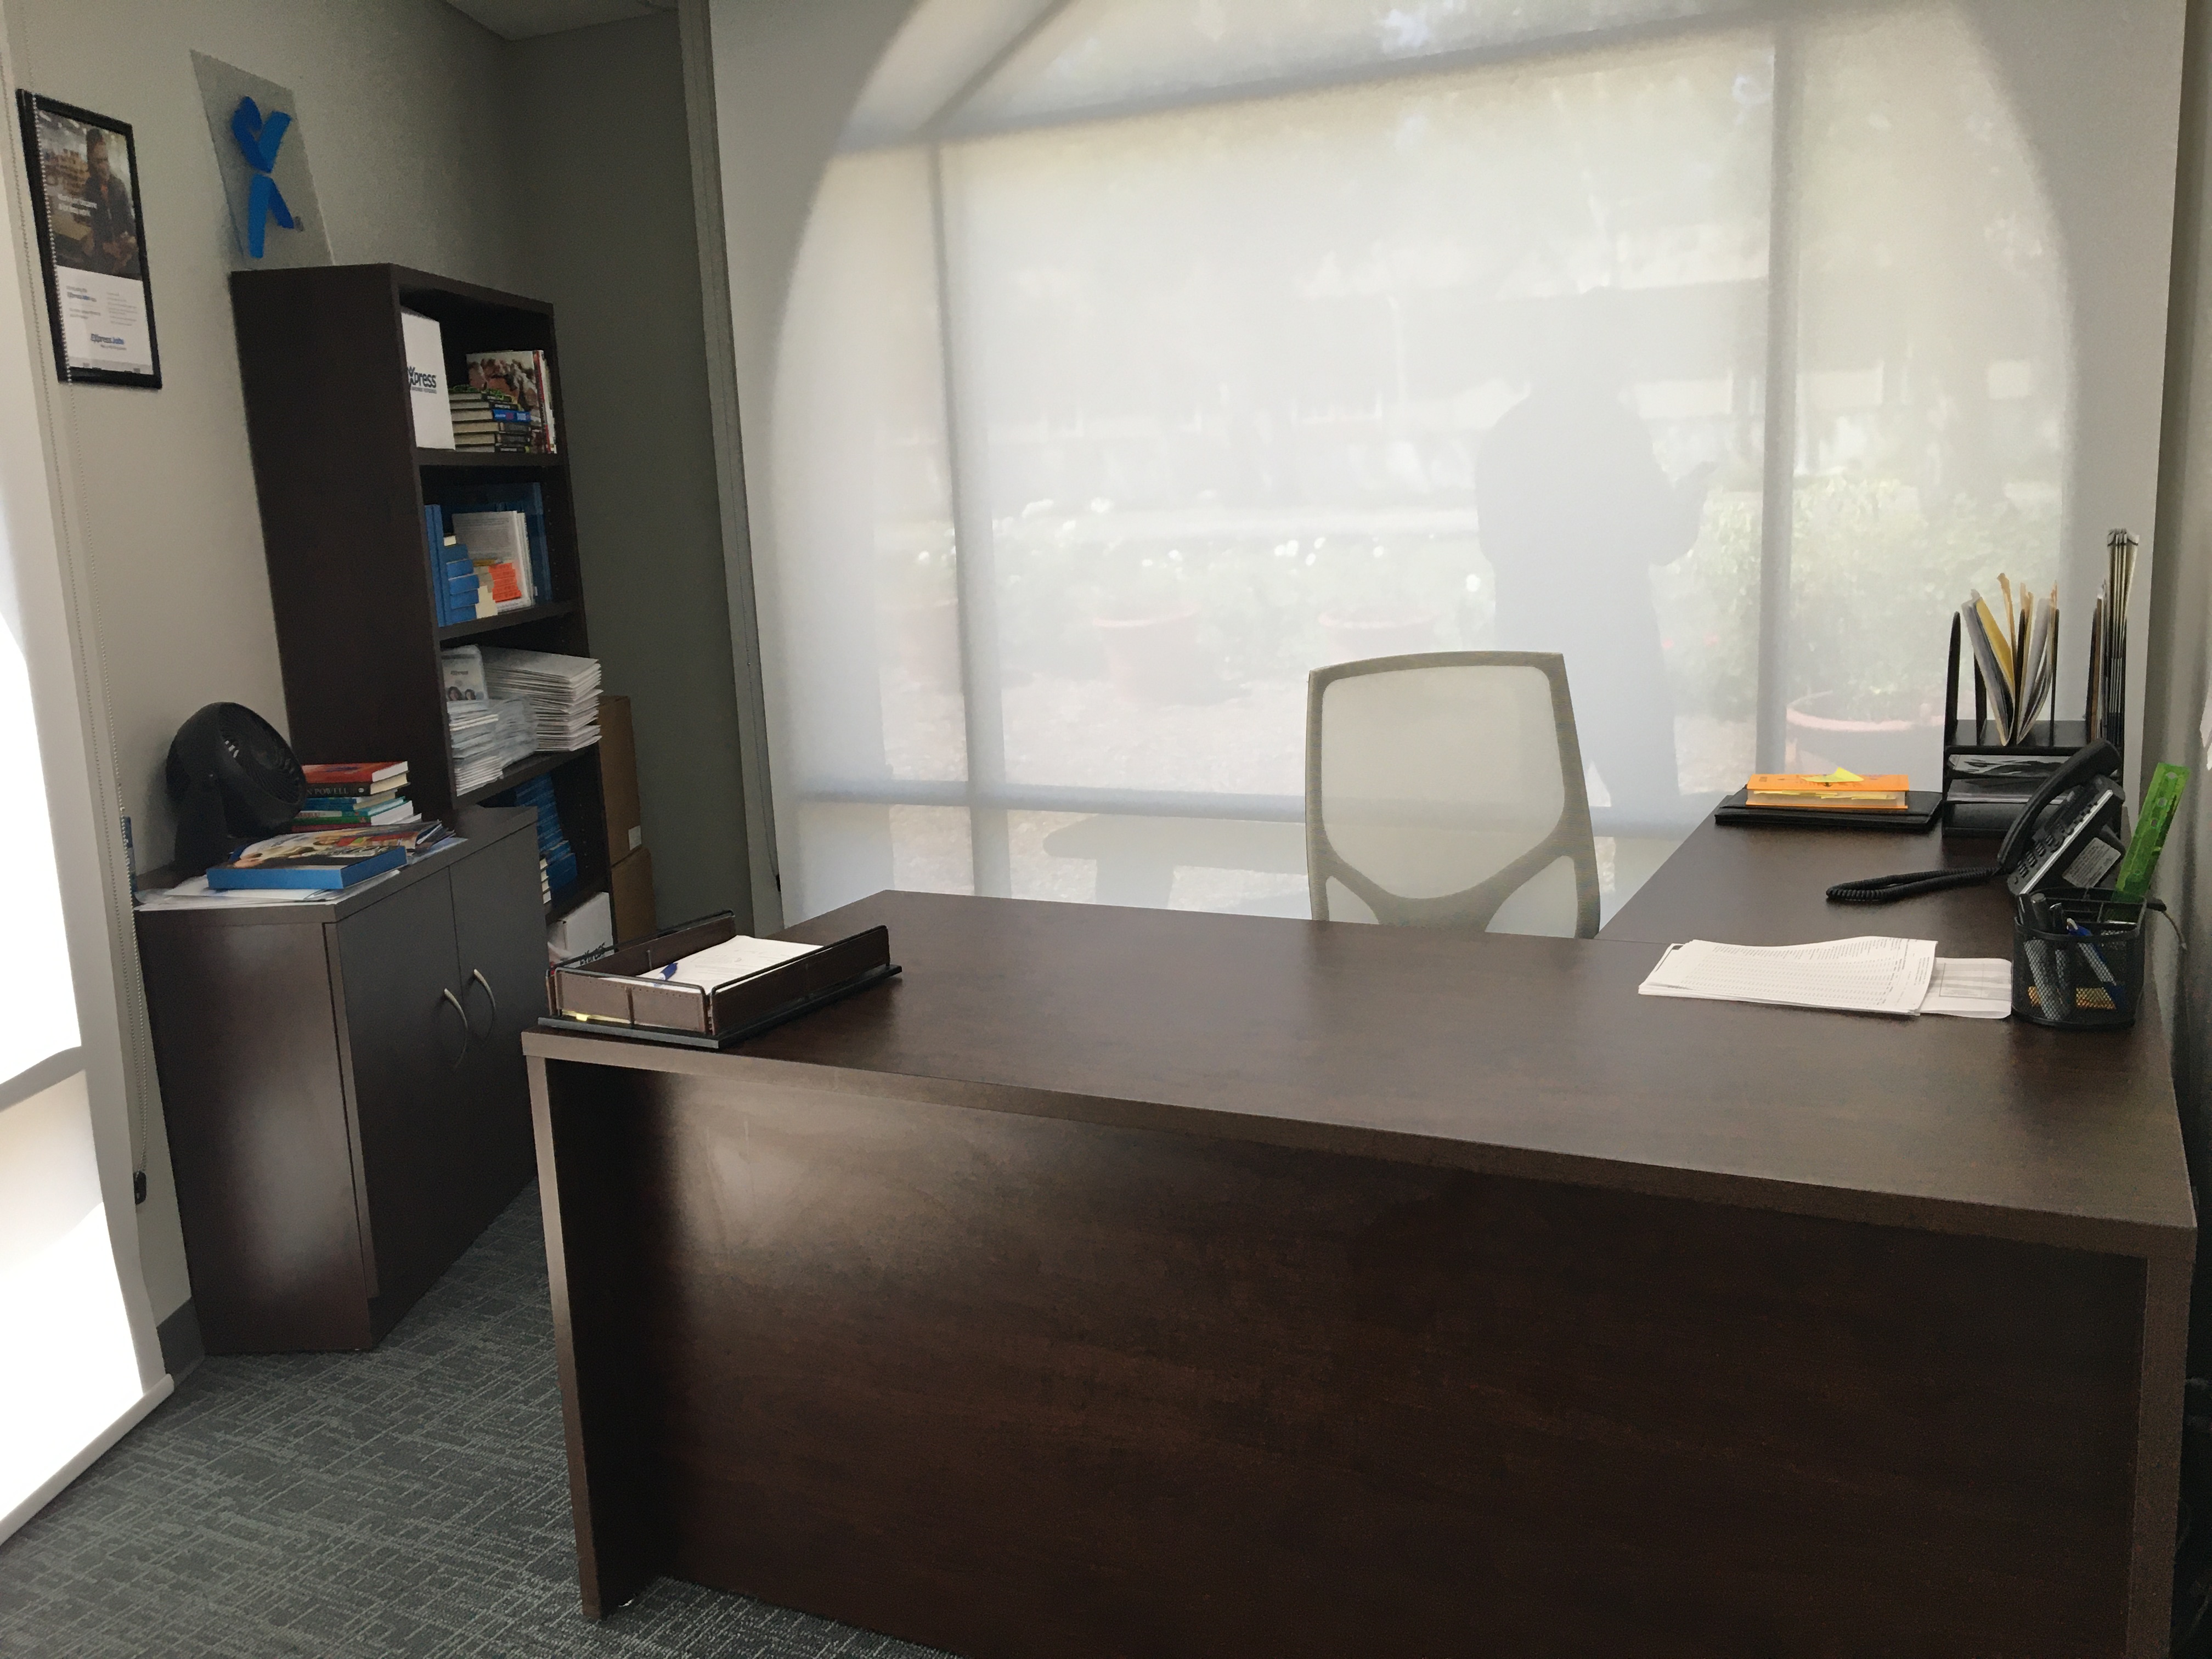 Conference Room for Rent - Thousand Oaks, CA - 04